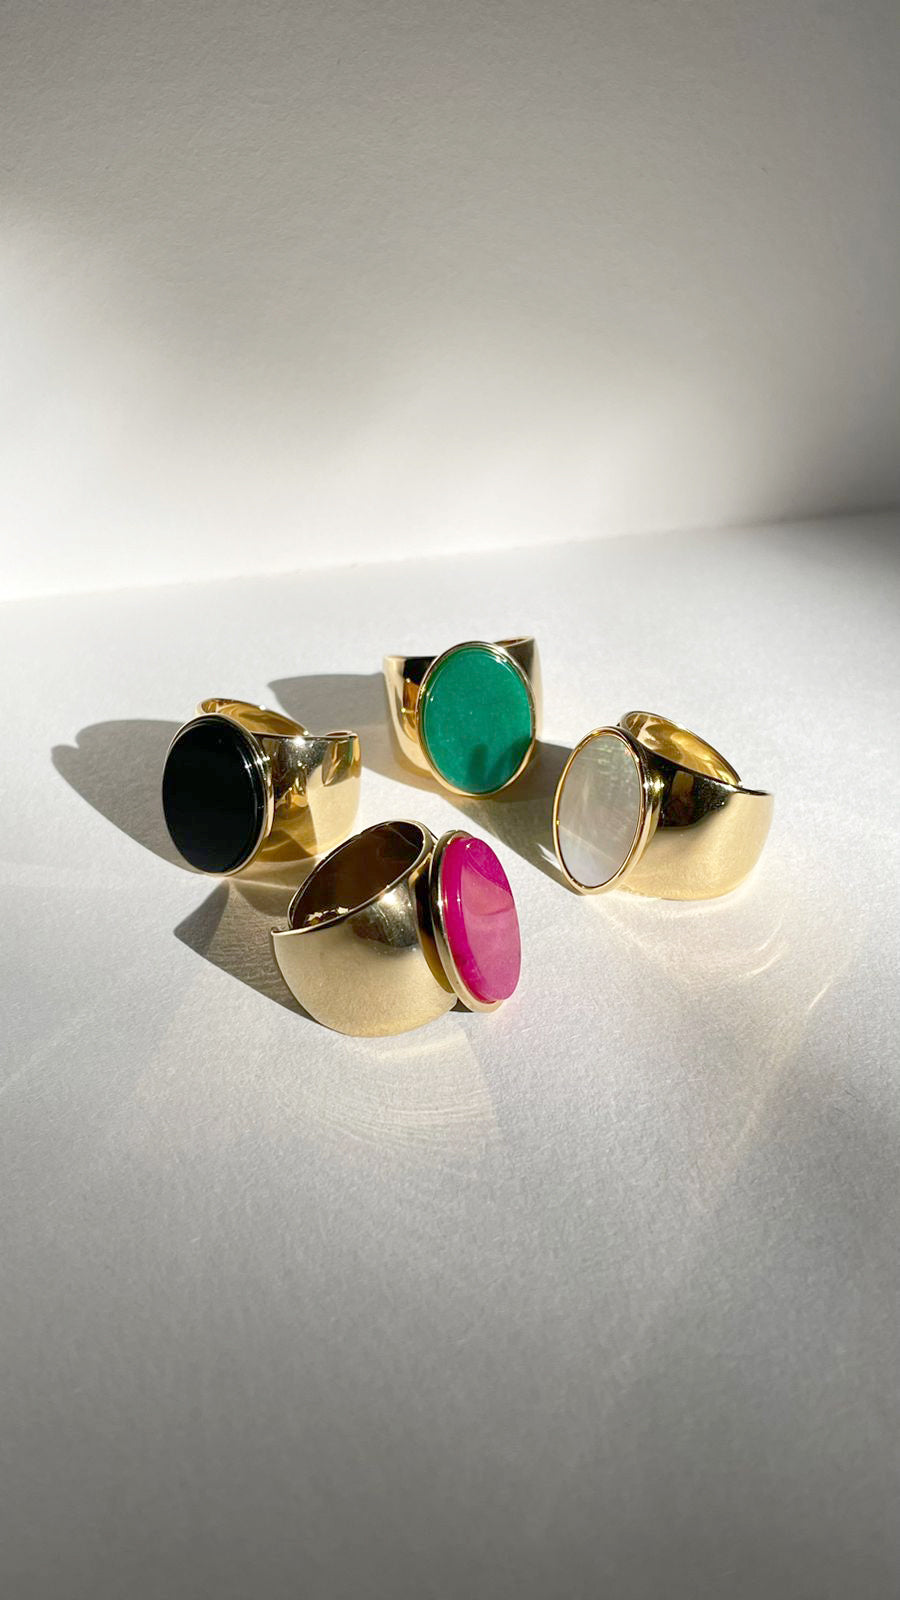 Introducing The Orea Ring! This statement piece is perfect for those who love to make a lasting impression through their jewelry. Available in four striking colors, crafted with precision to ensure a silky, lustrous shine. A must have piece that speaks volumes about your style wherever you go.